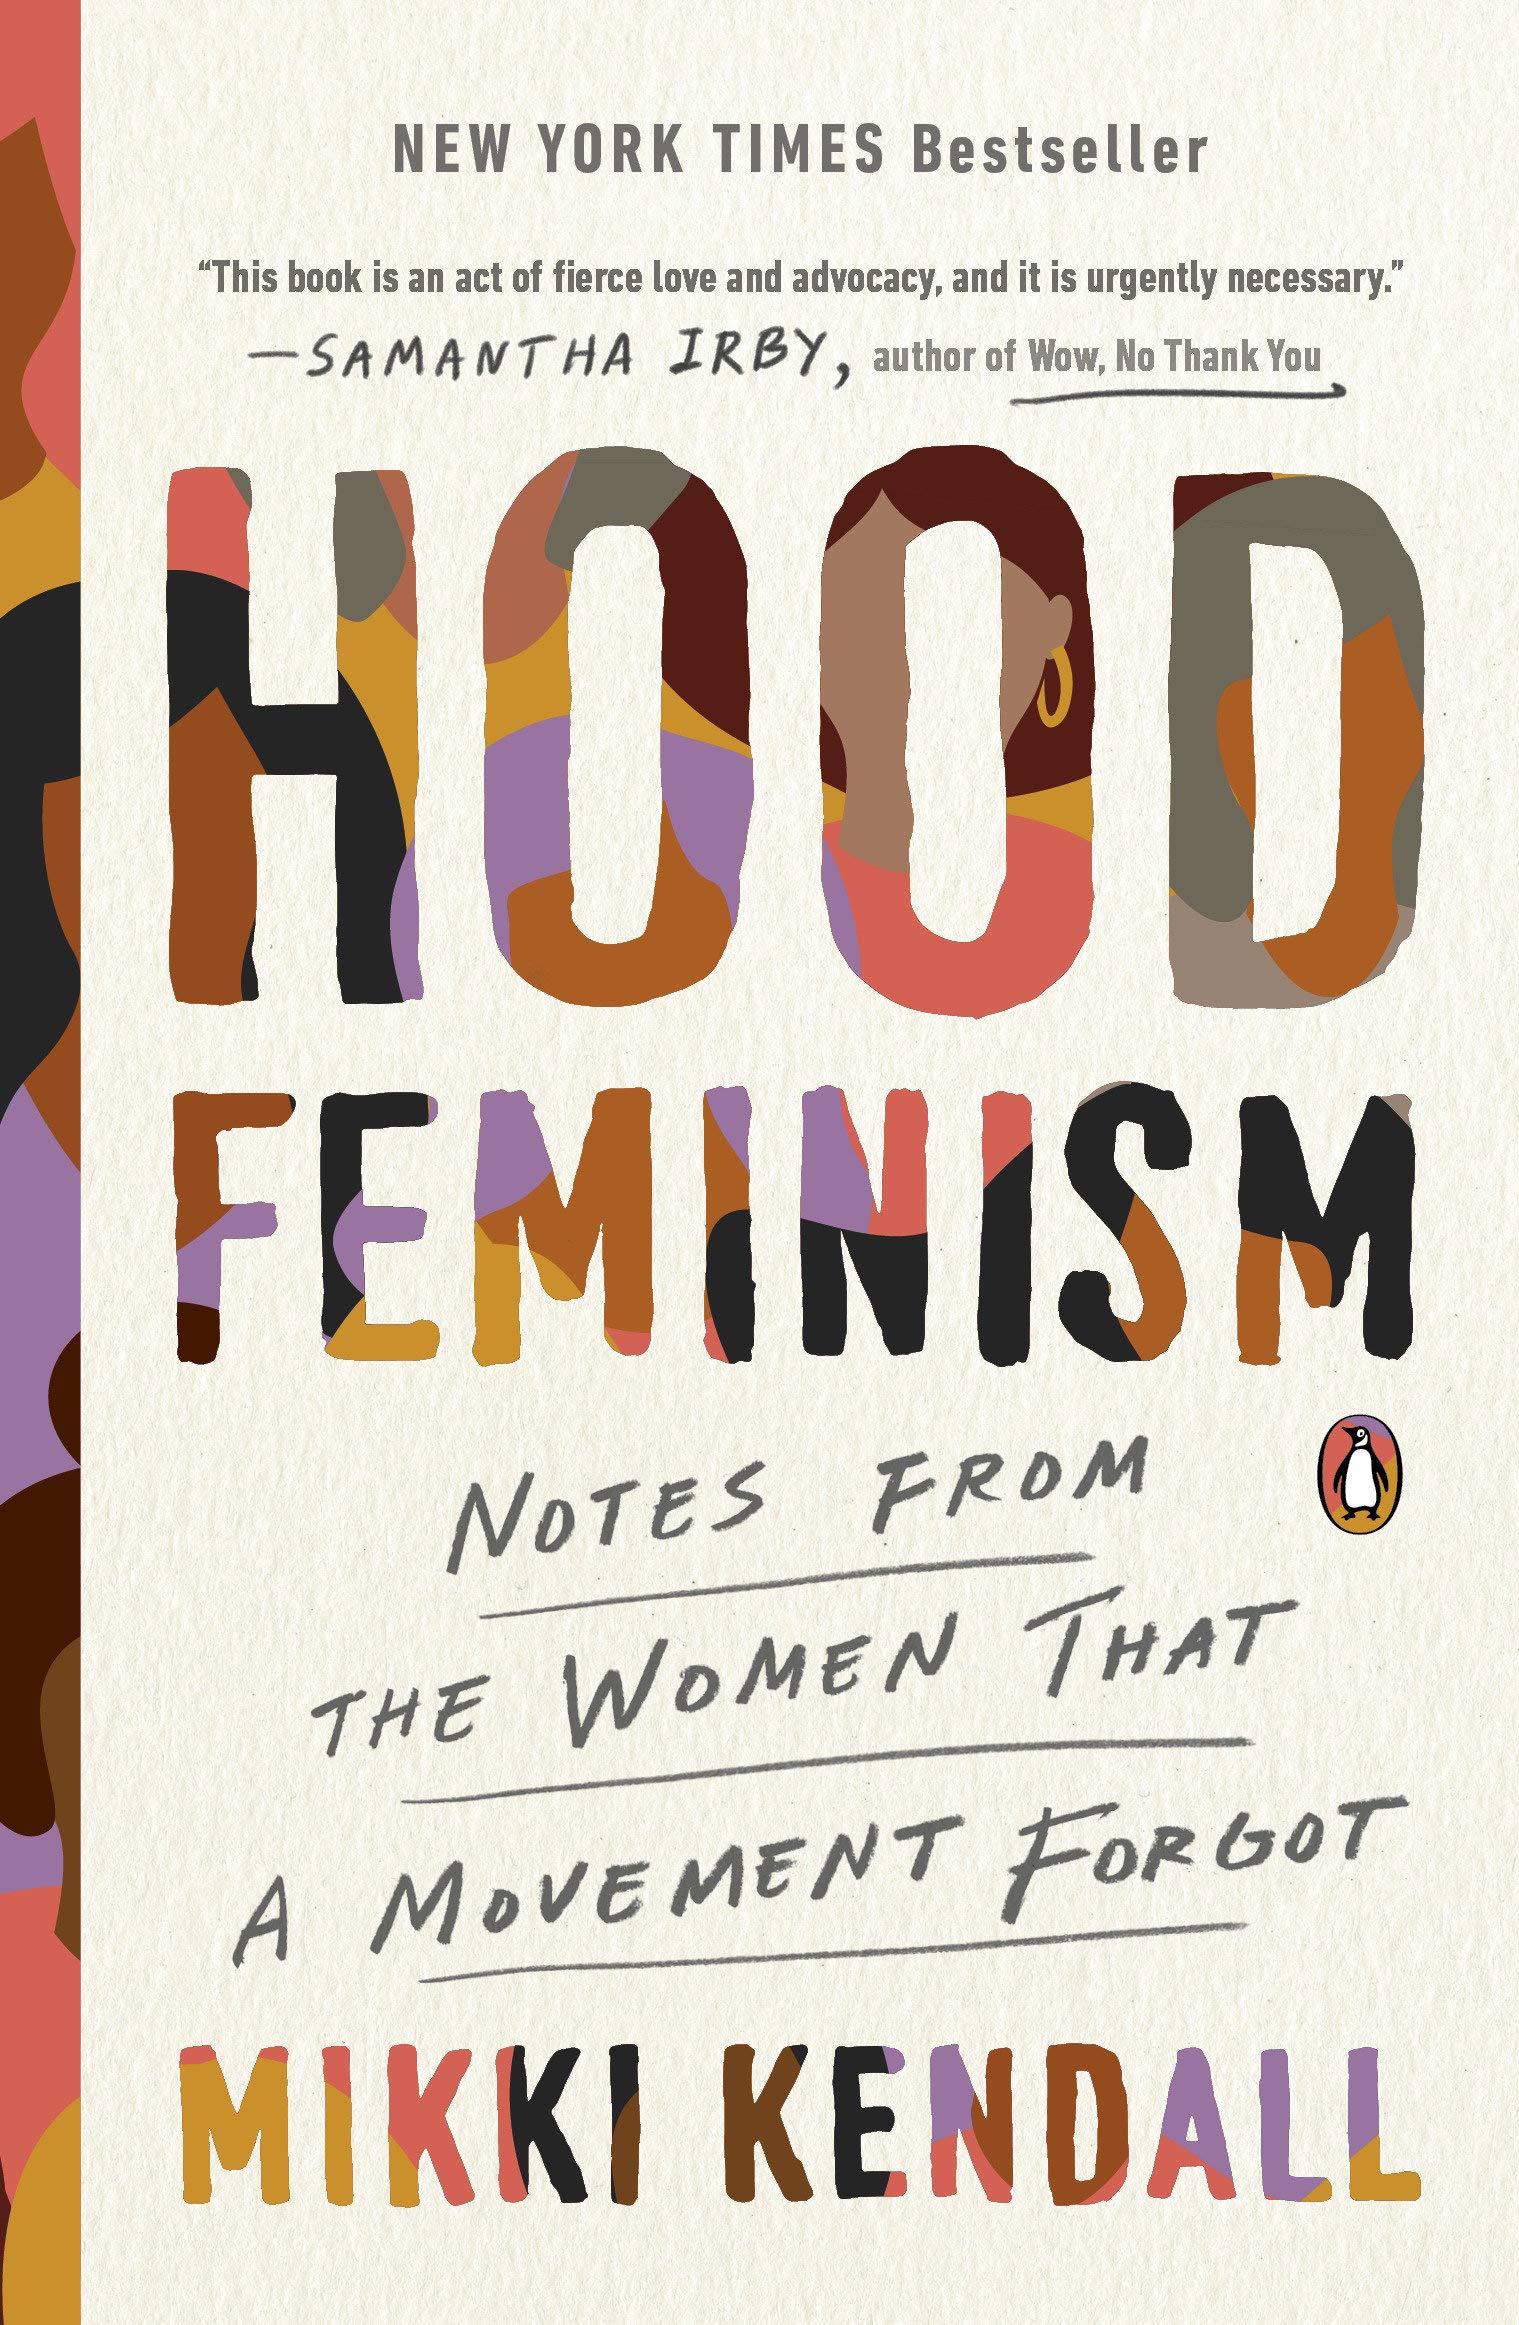 Mostly beige book cover with a line and lettering in colorful illustrations of women of color.